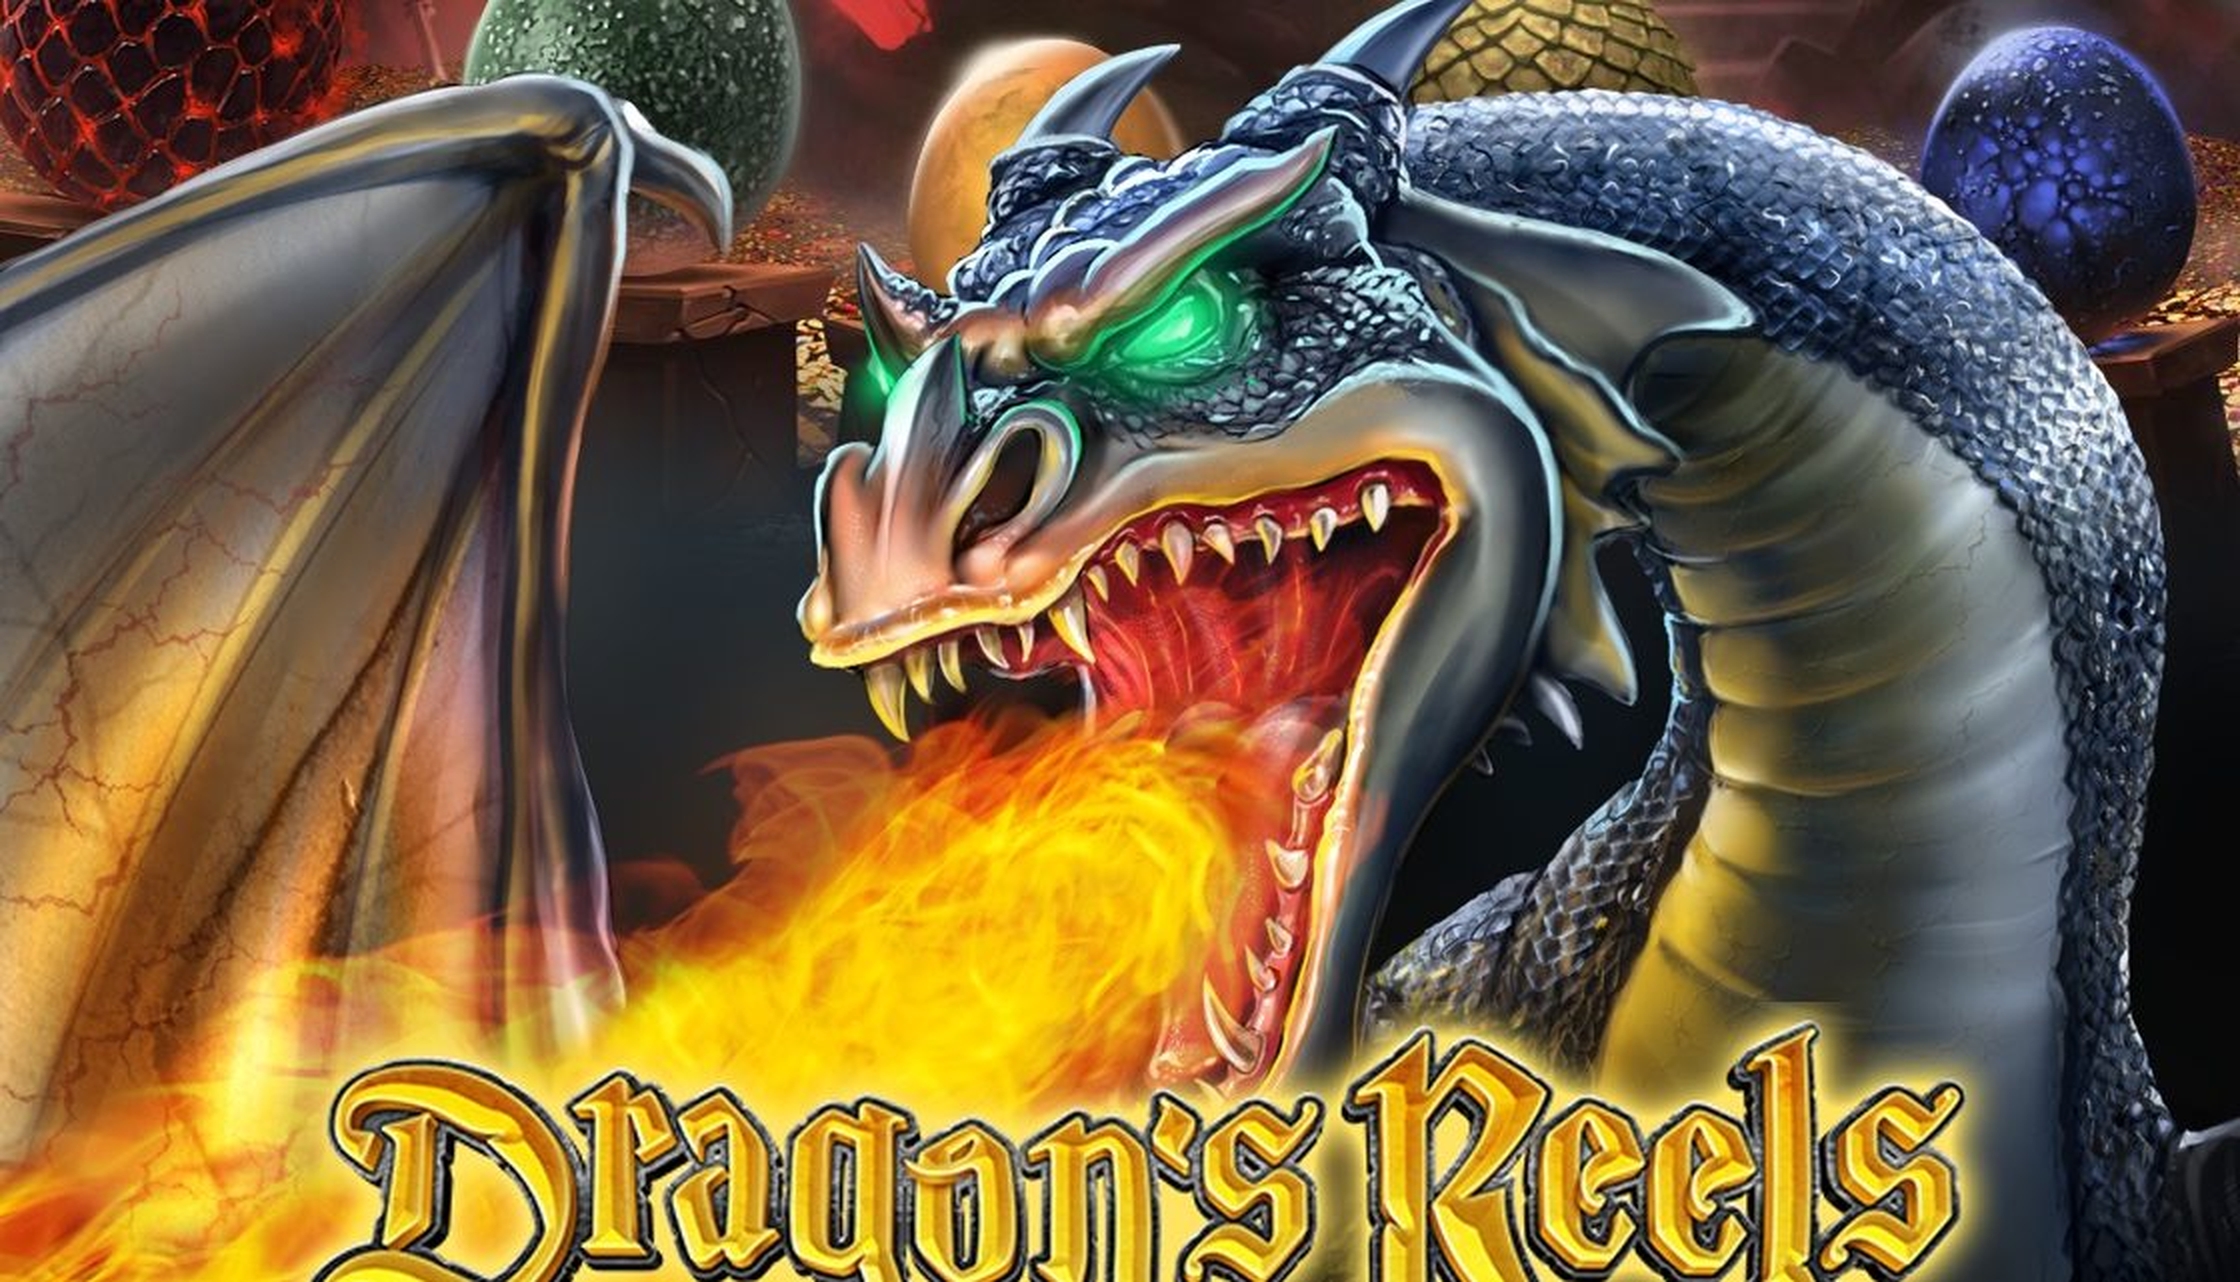 The Dragon Reels Online Slot Demo Game by EGT